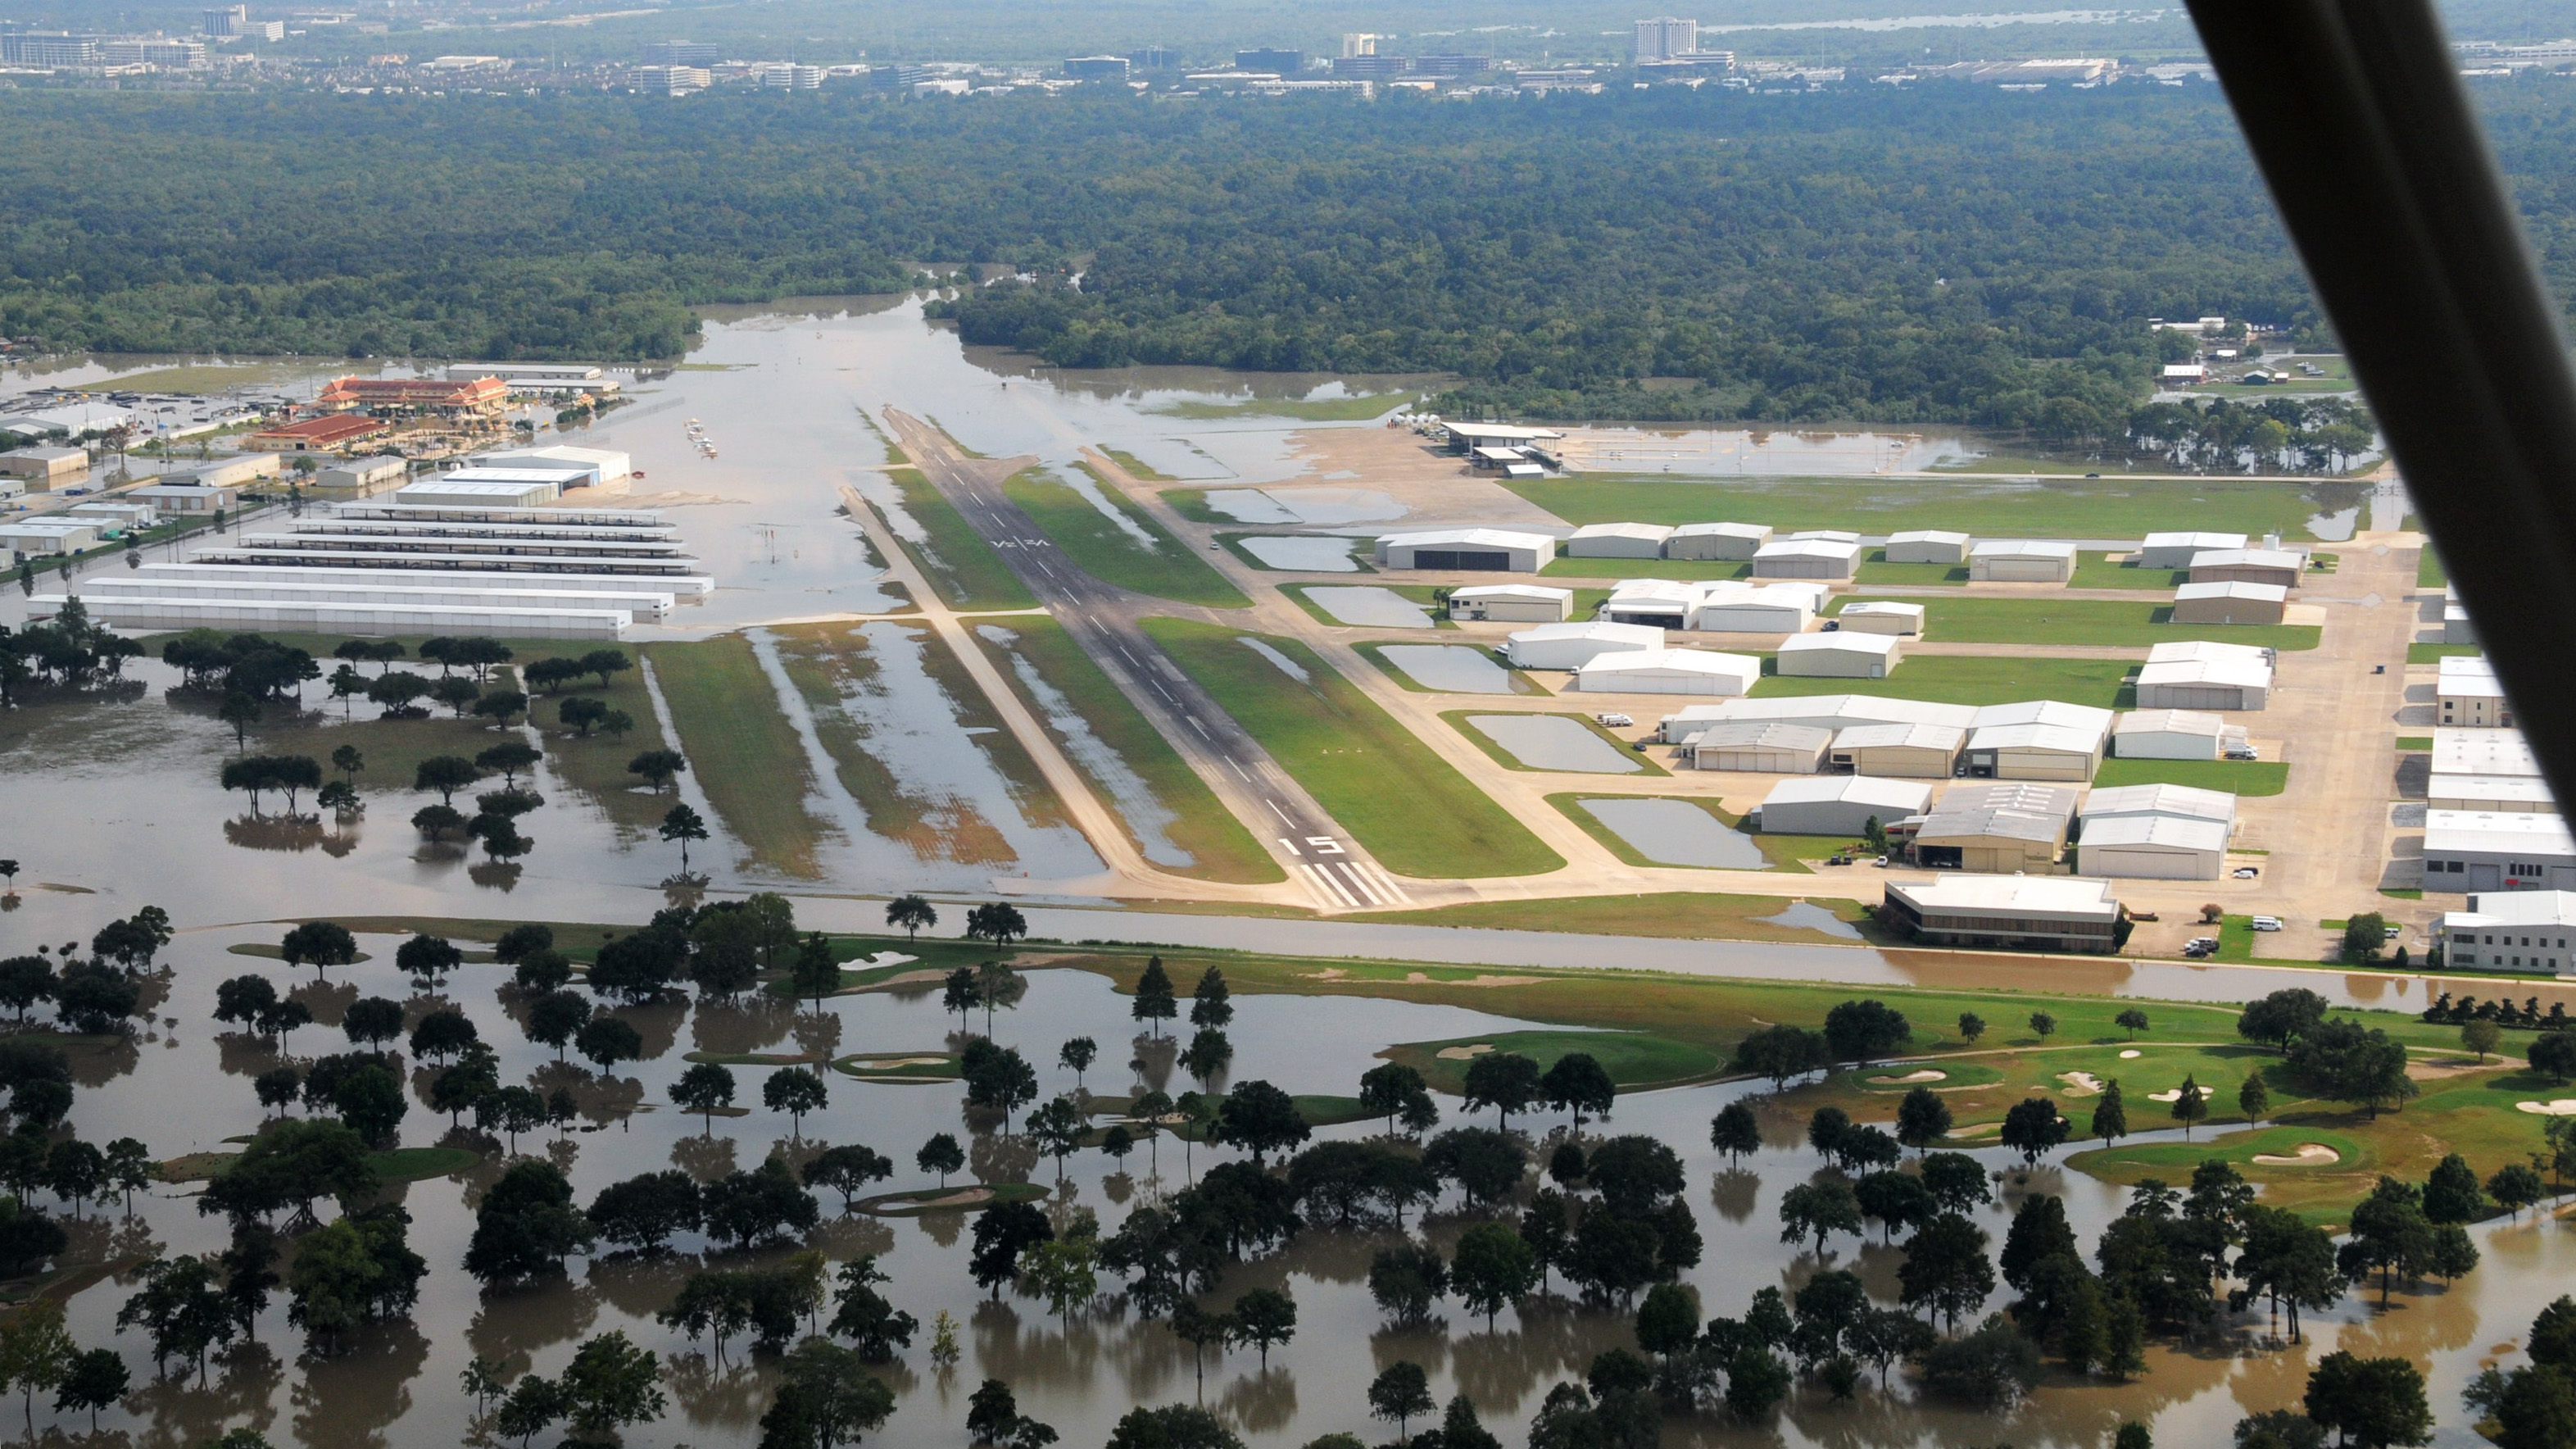 West Houston Airport after Hurricane Harvey. Photo courtesy of Jeffrey Weiss.